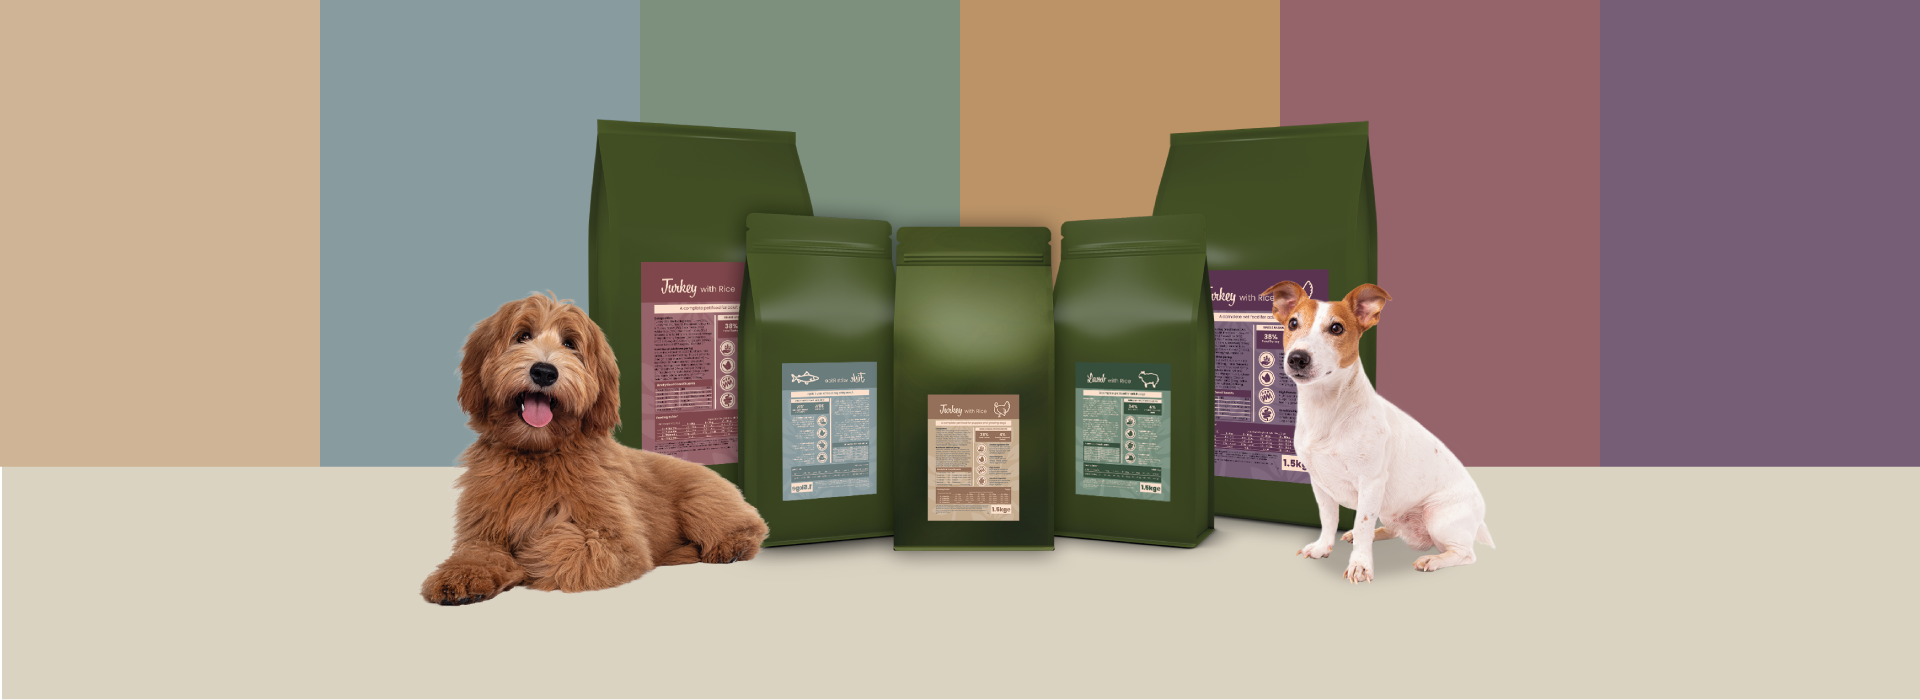 Creating your own brand of the world’s finest pet food has never been so easy… Here at GA Pet Food Partners, we are passionate about making and delivering the world’s finest pet food. As a partner, you can use our expertise to create your own private label success.